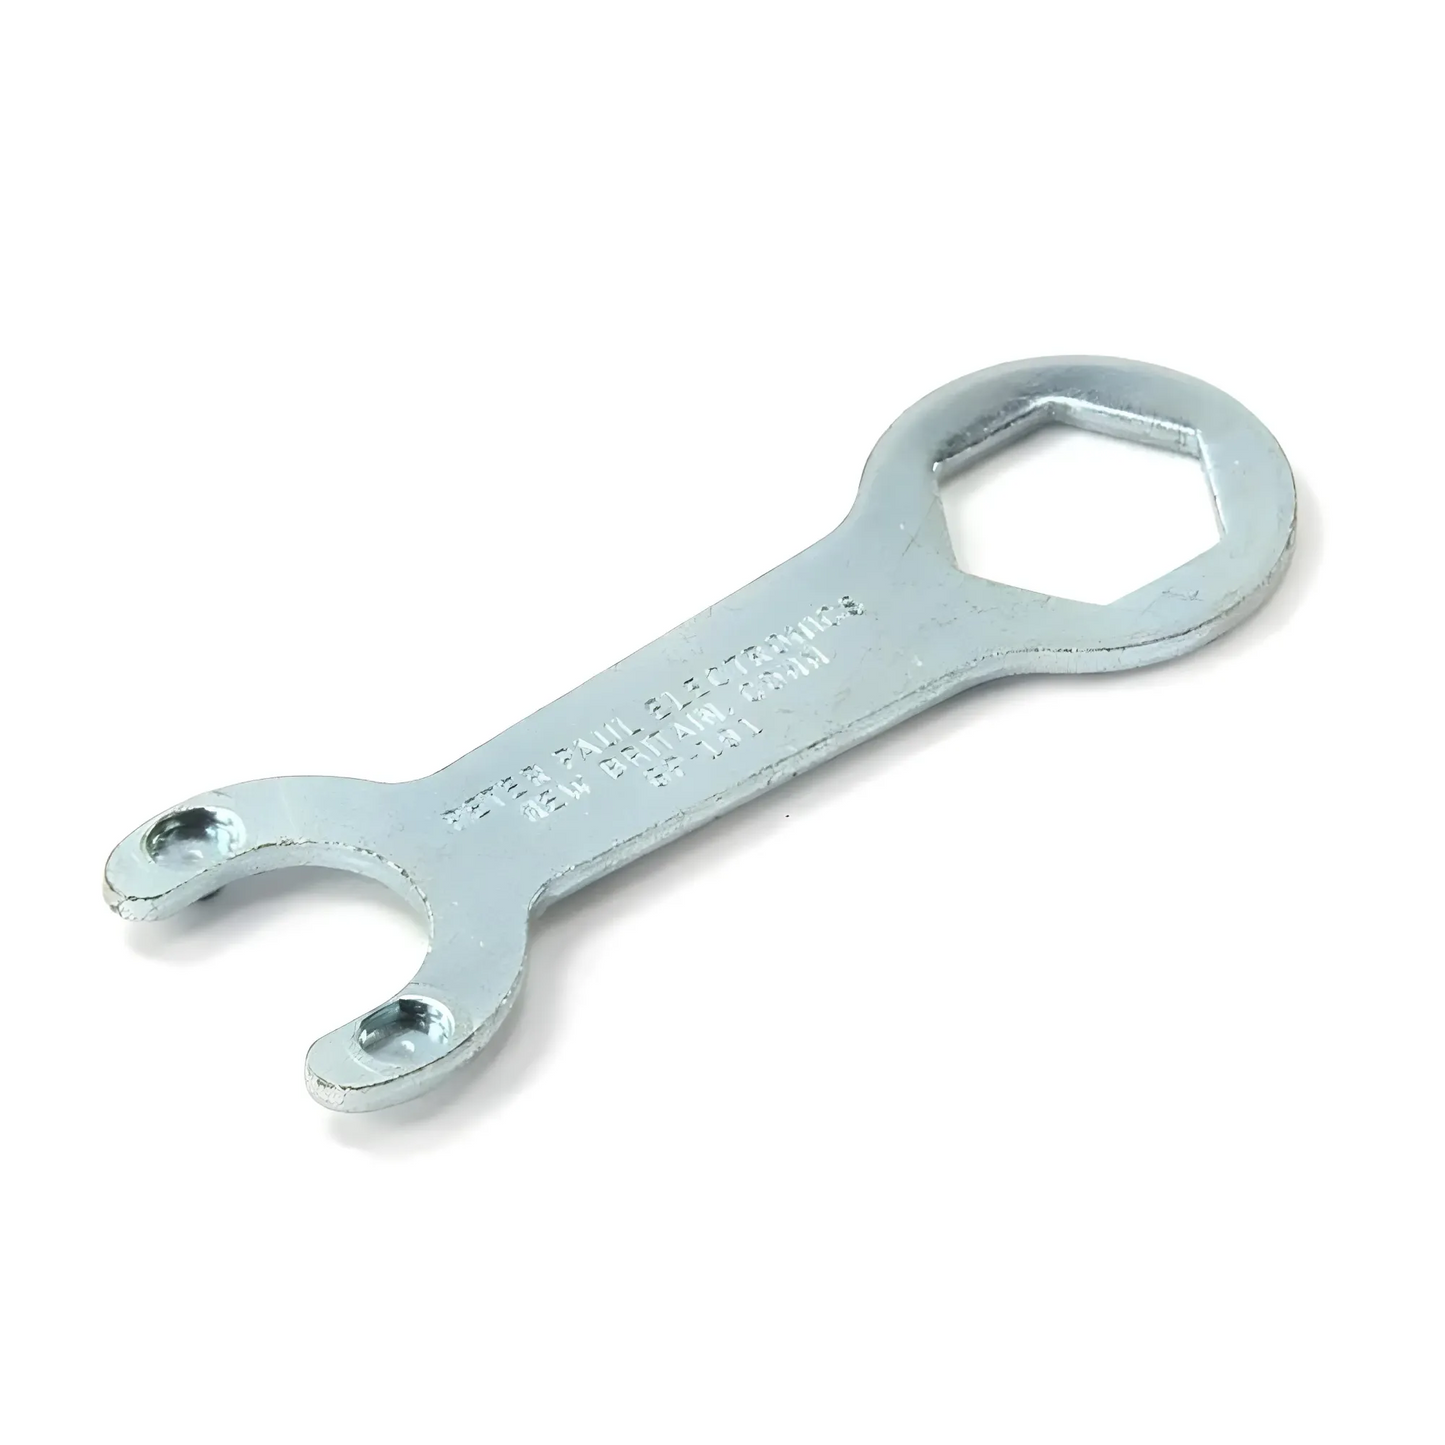 Trashcan Solenoid Wrench